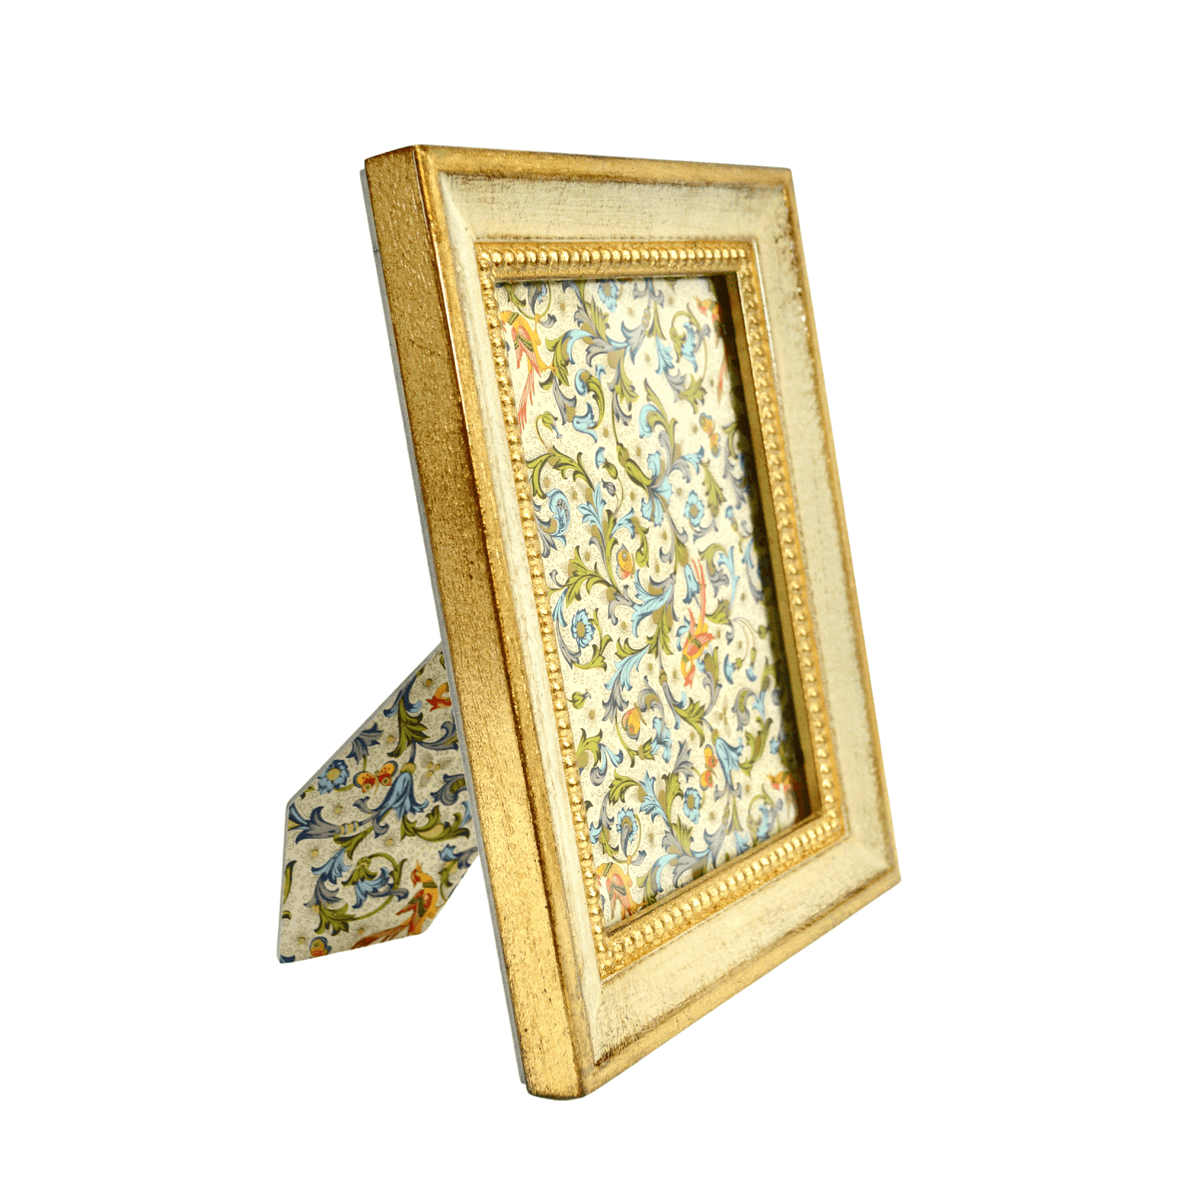 Italian Florentine Carved Wooden Photo Frame, 5 x 7, Made in Italy - My Italian Decor